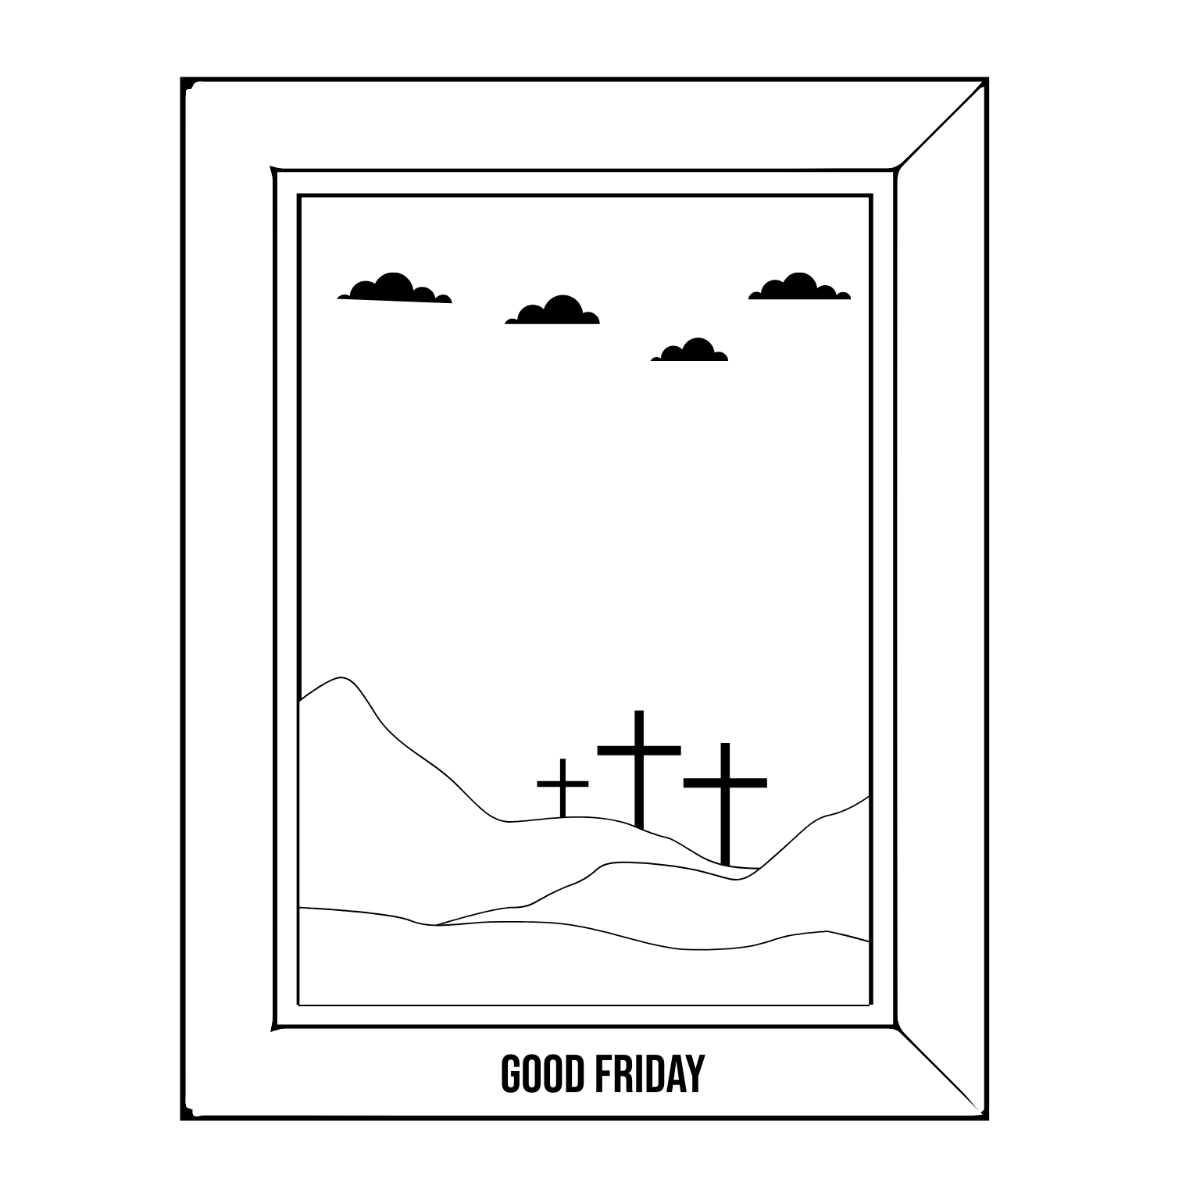 Good Friday Image Drawing Template